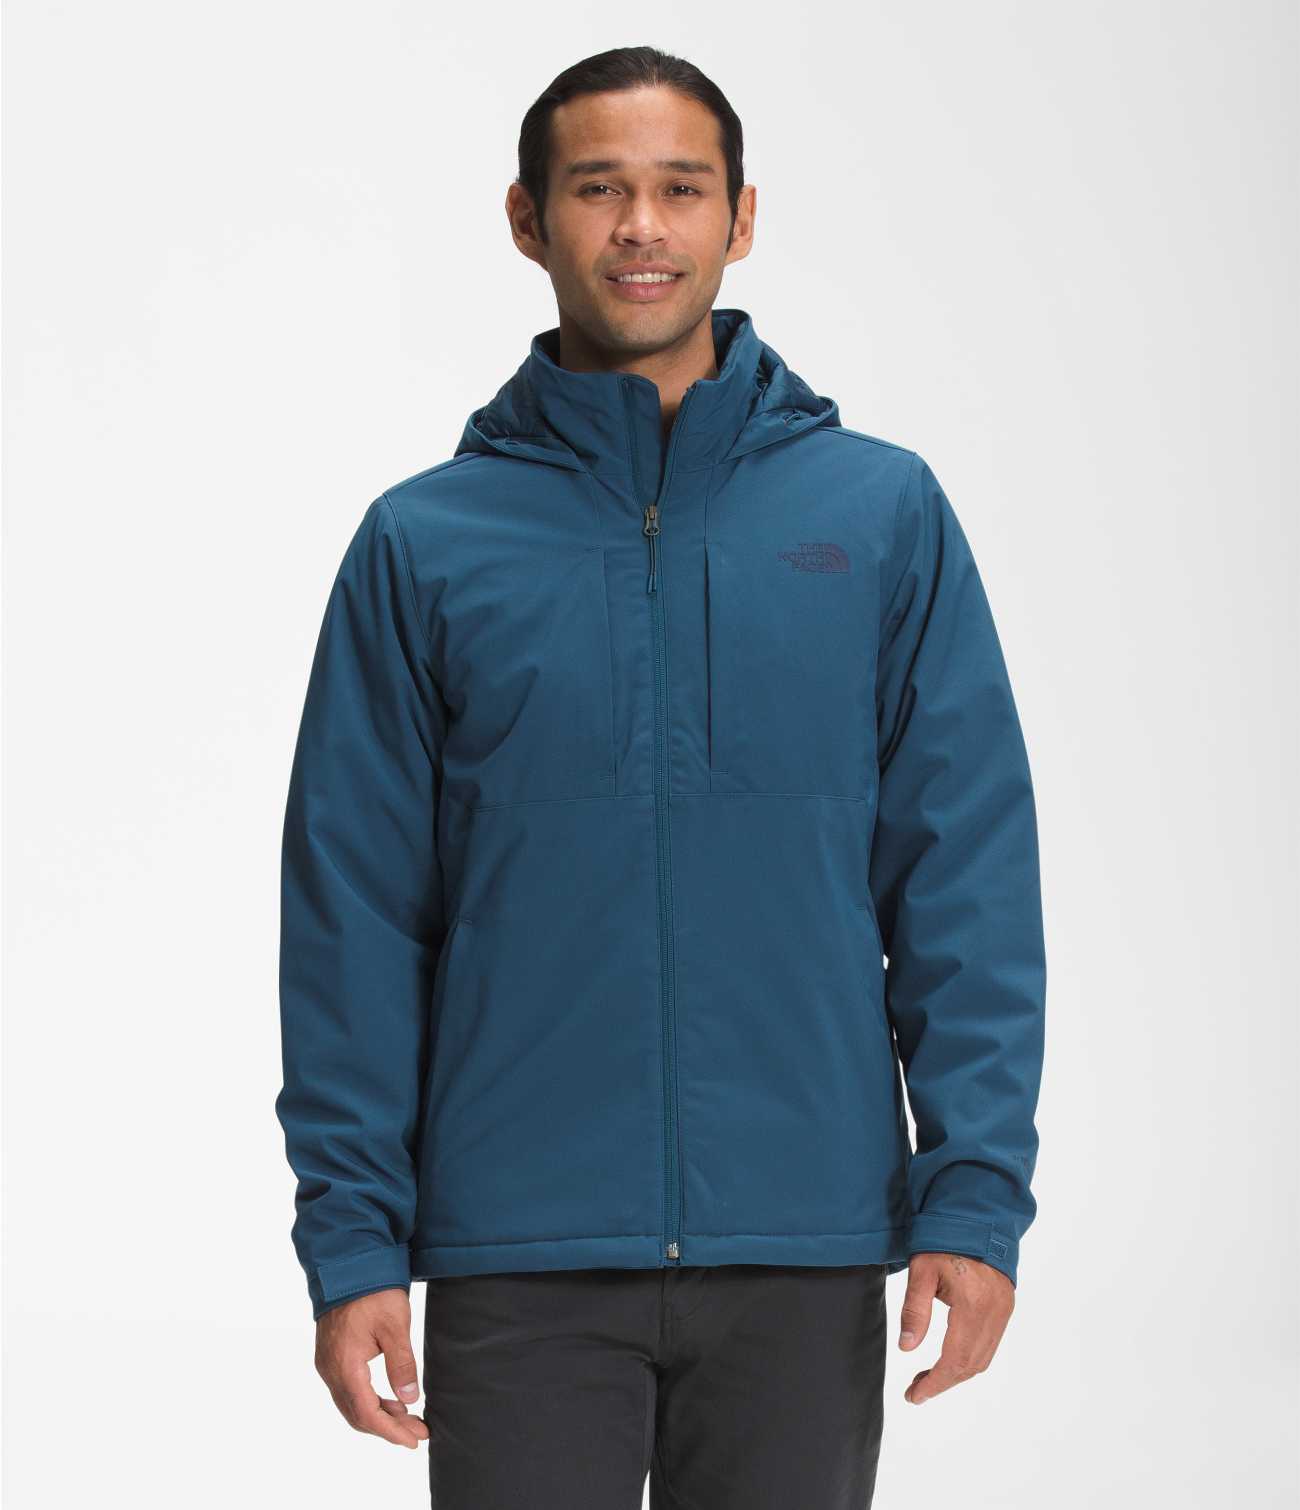 MEN'S APEX ELEVATION JACKET | The North Face | The North Face Renewed